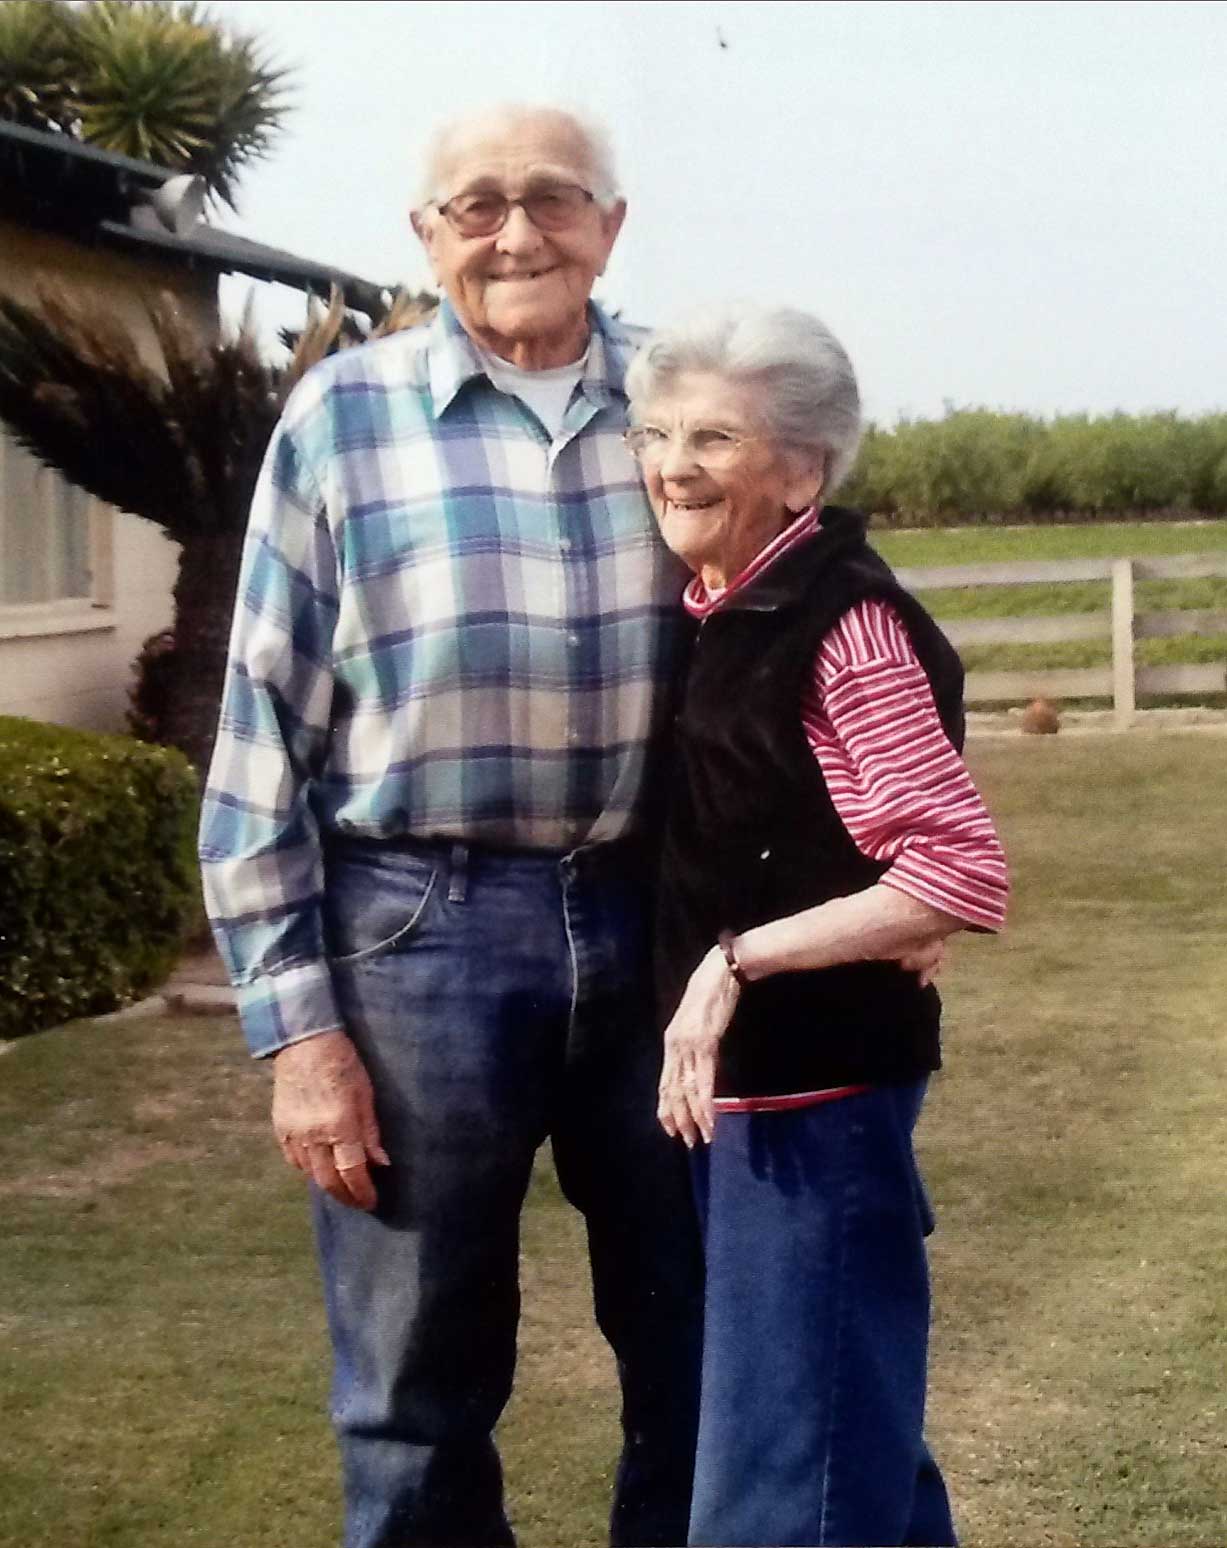 In this March 2014 photo provided by Cynthia Letson, Floyd and Violet Hartwig pose together in a yard in Easton, Calif. (Cynthia Letson—AP)